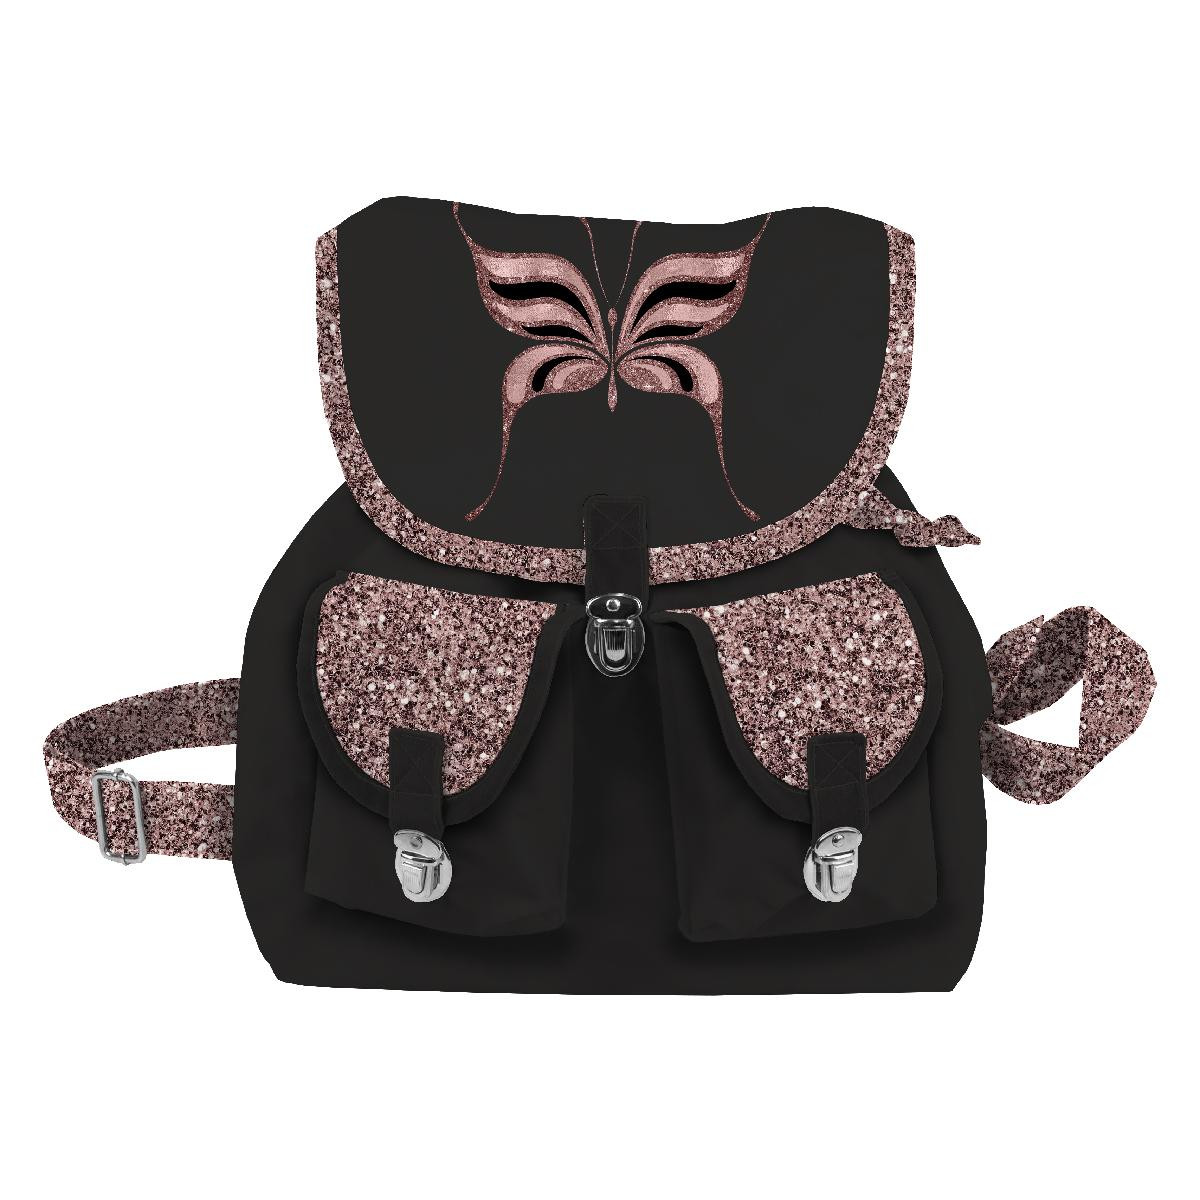 VINTAGE BACKPACK -  GLITTER BUTTERFLY - sewing set